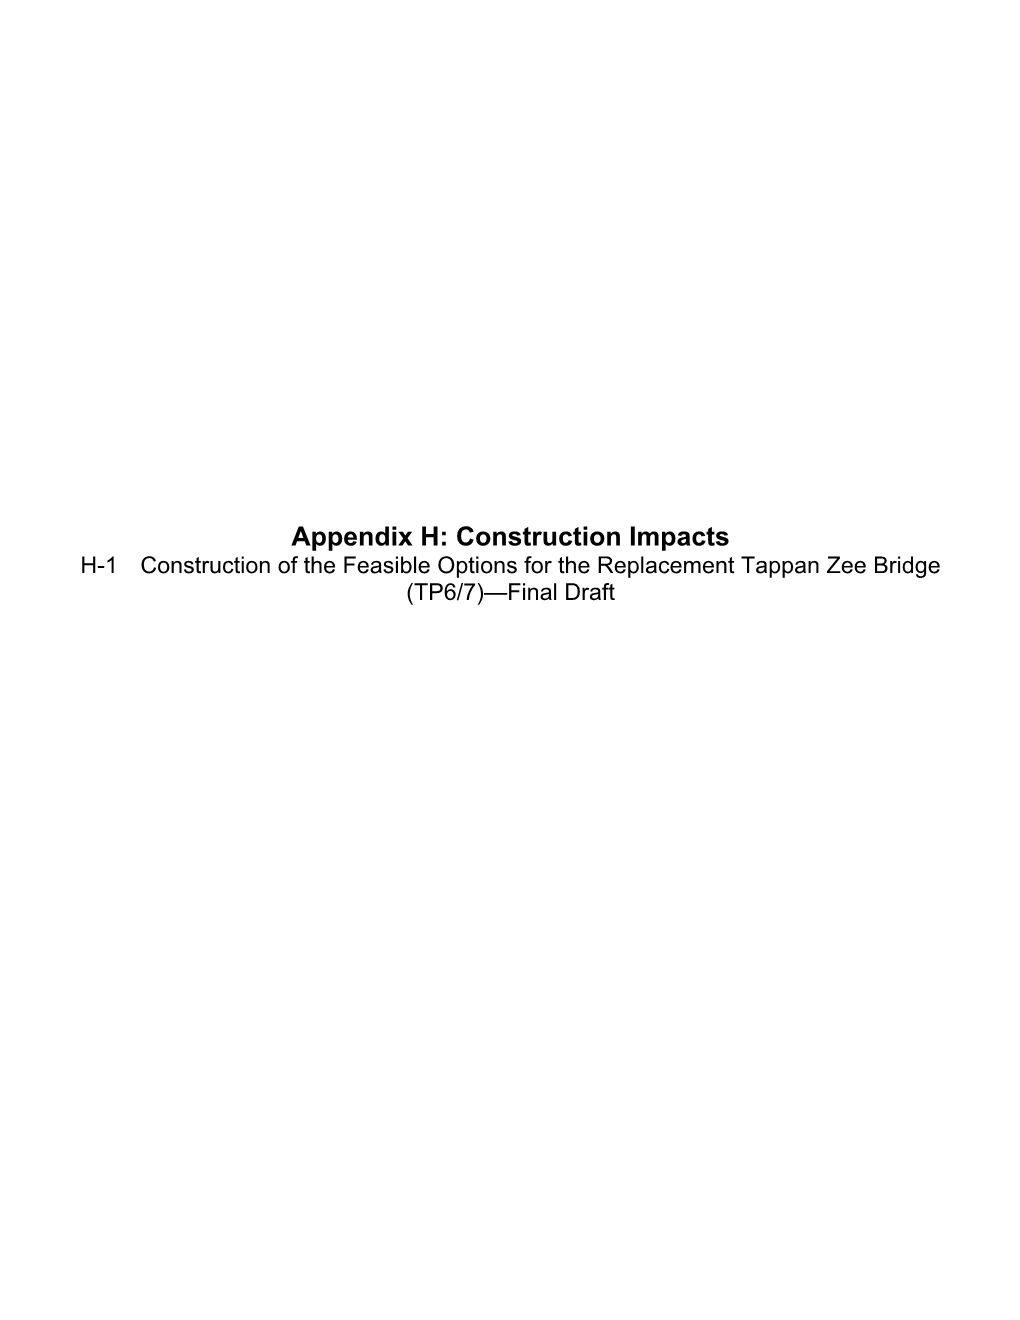 Appendix H: Construction Impacts H-1 Construction of the Feasible Options for the Replacement Tappan Zee Bridge (TP6/7)—Final Draft